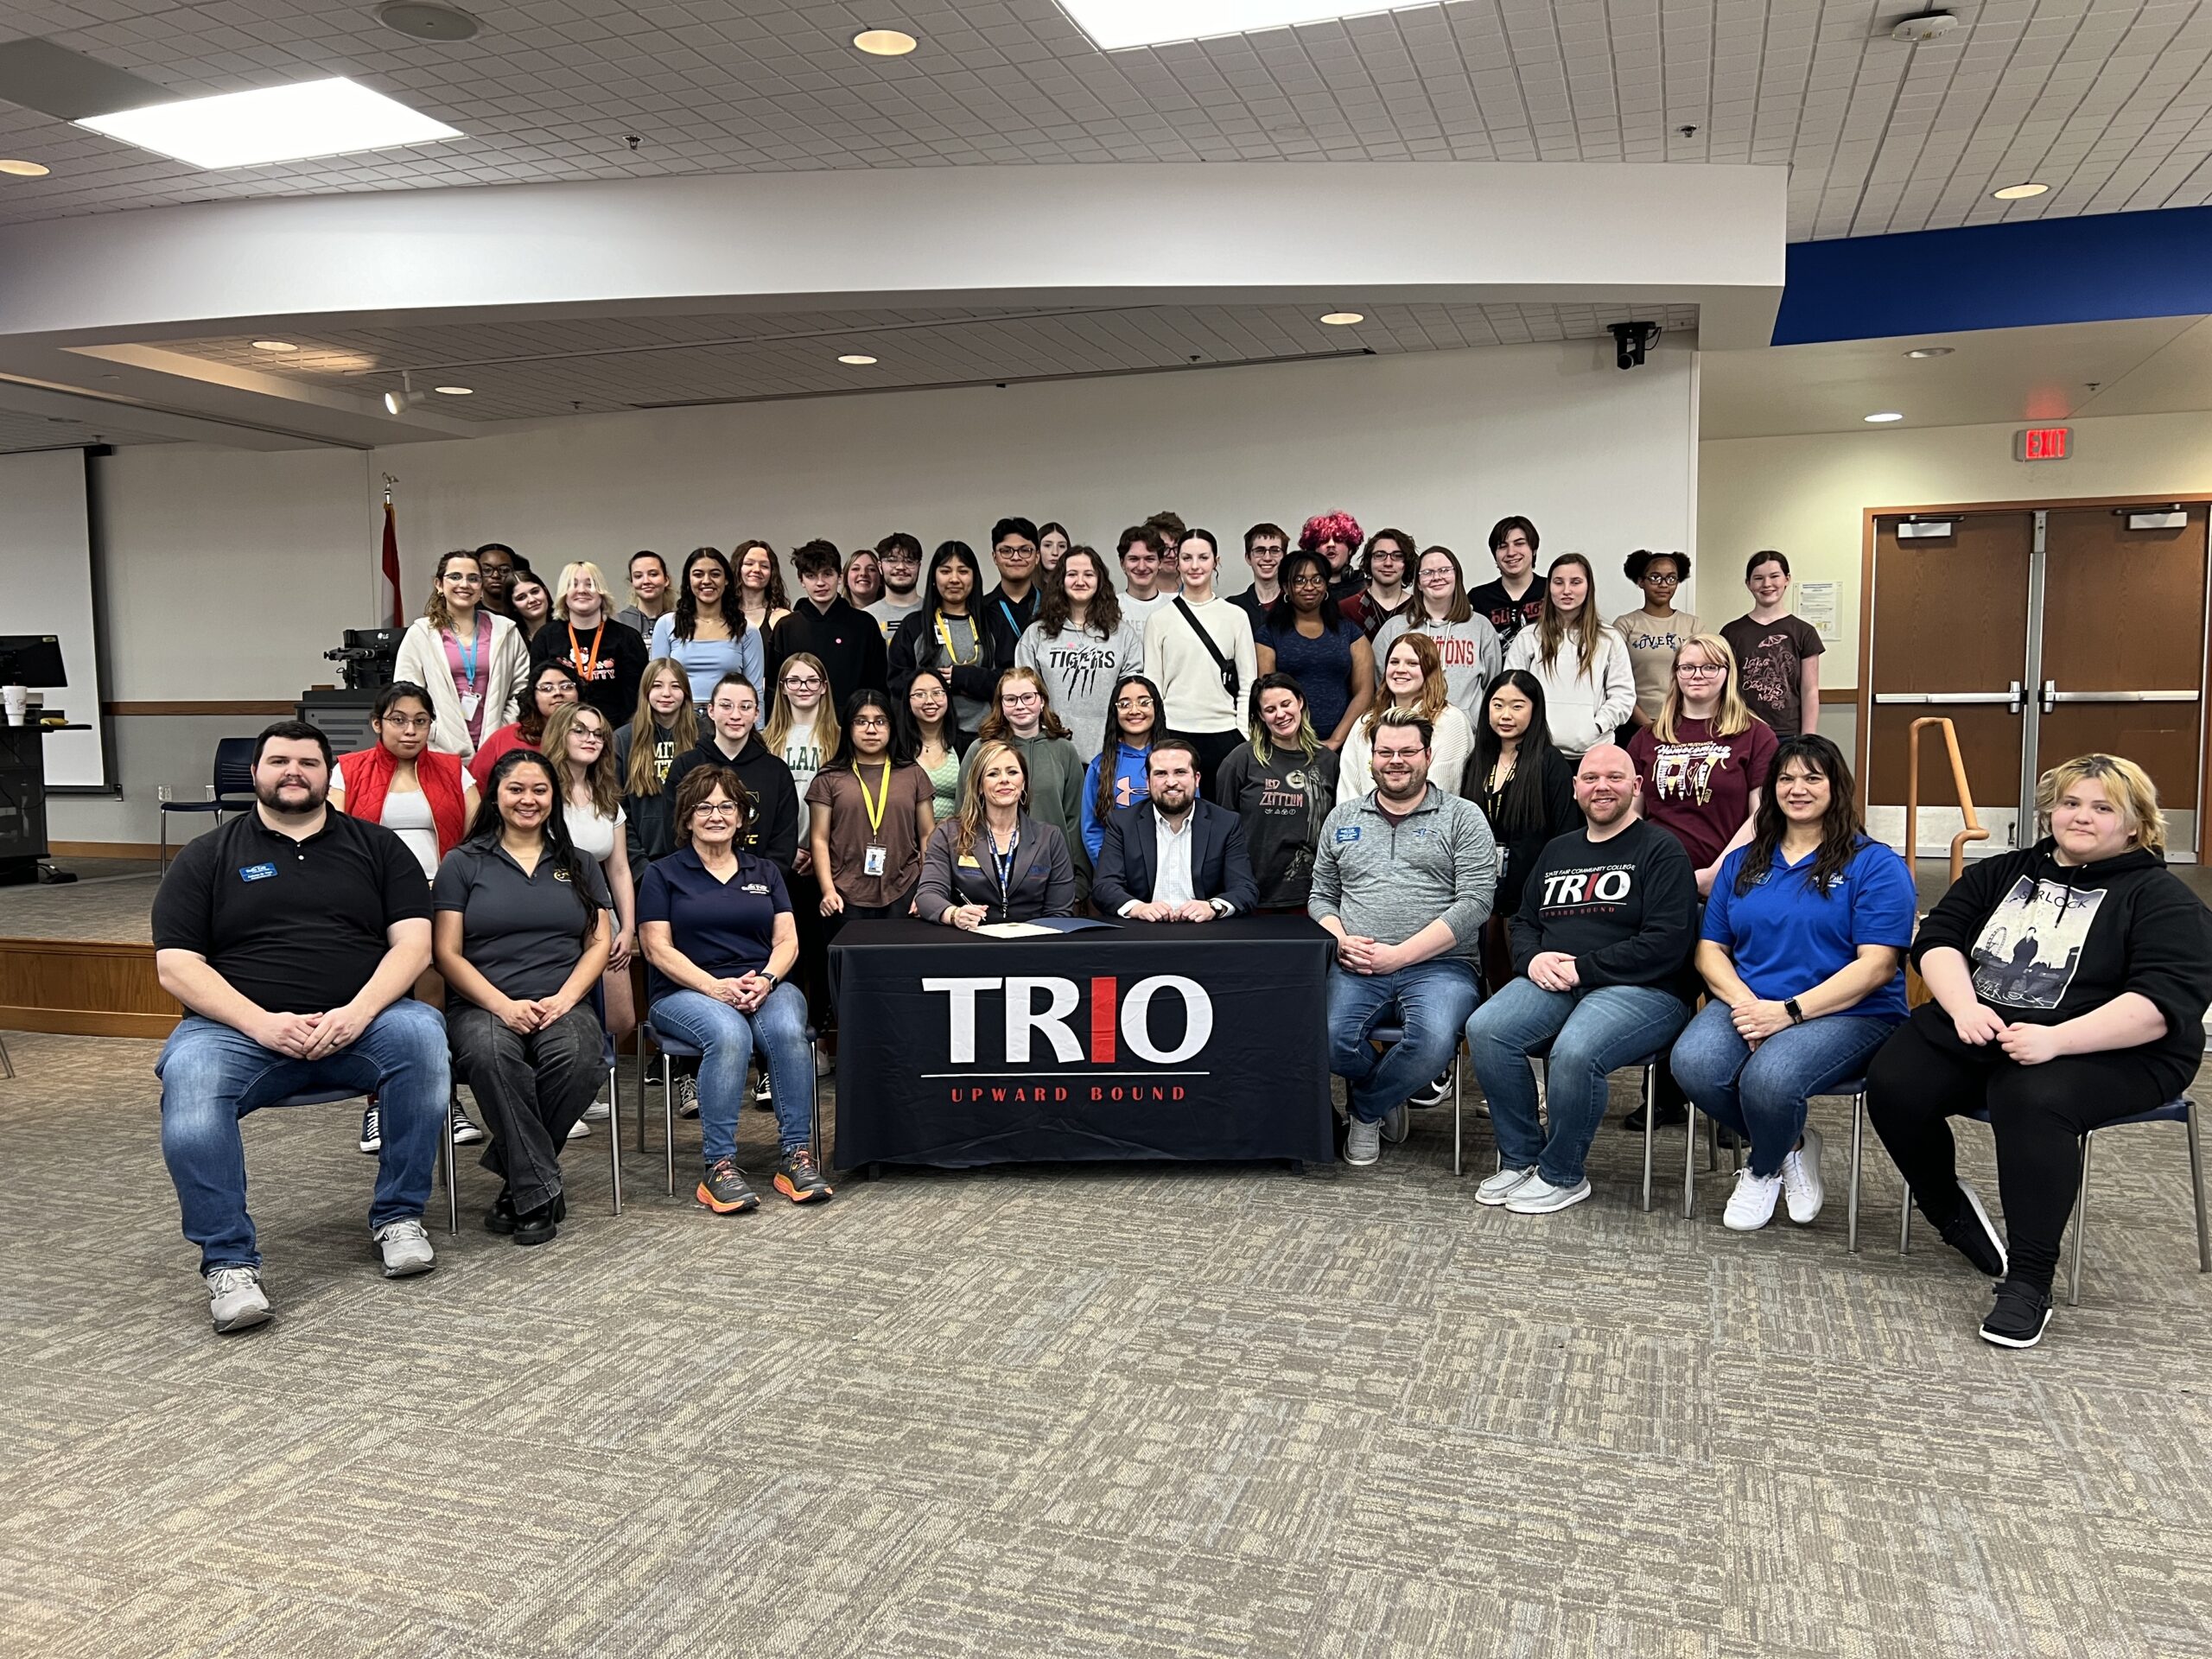 Read more about Proclamation Signing on the SFCC Sedalia Campus Declares TRiO Day